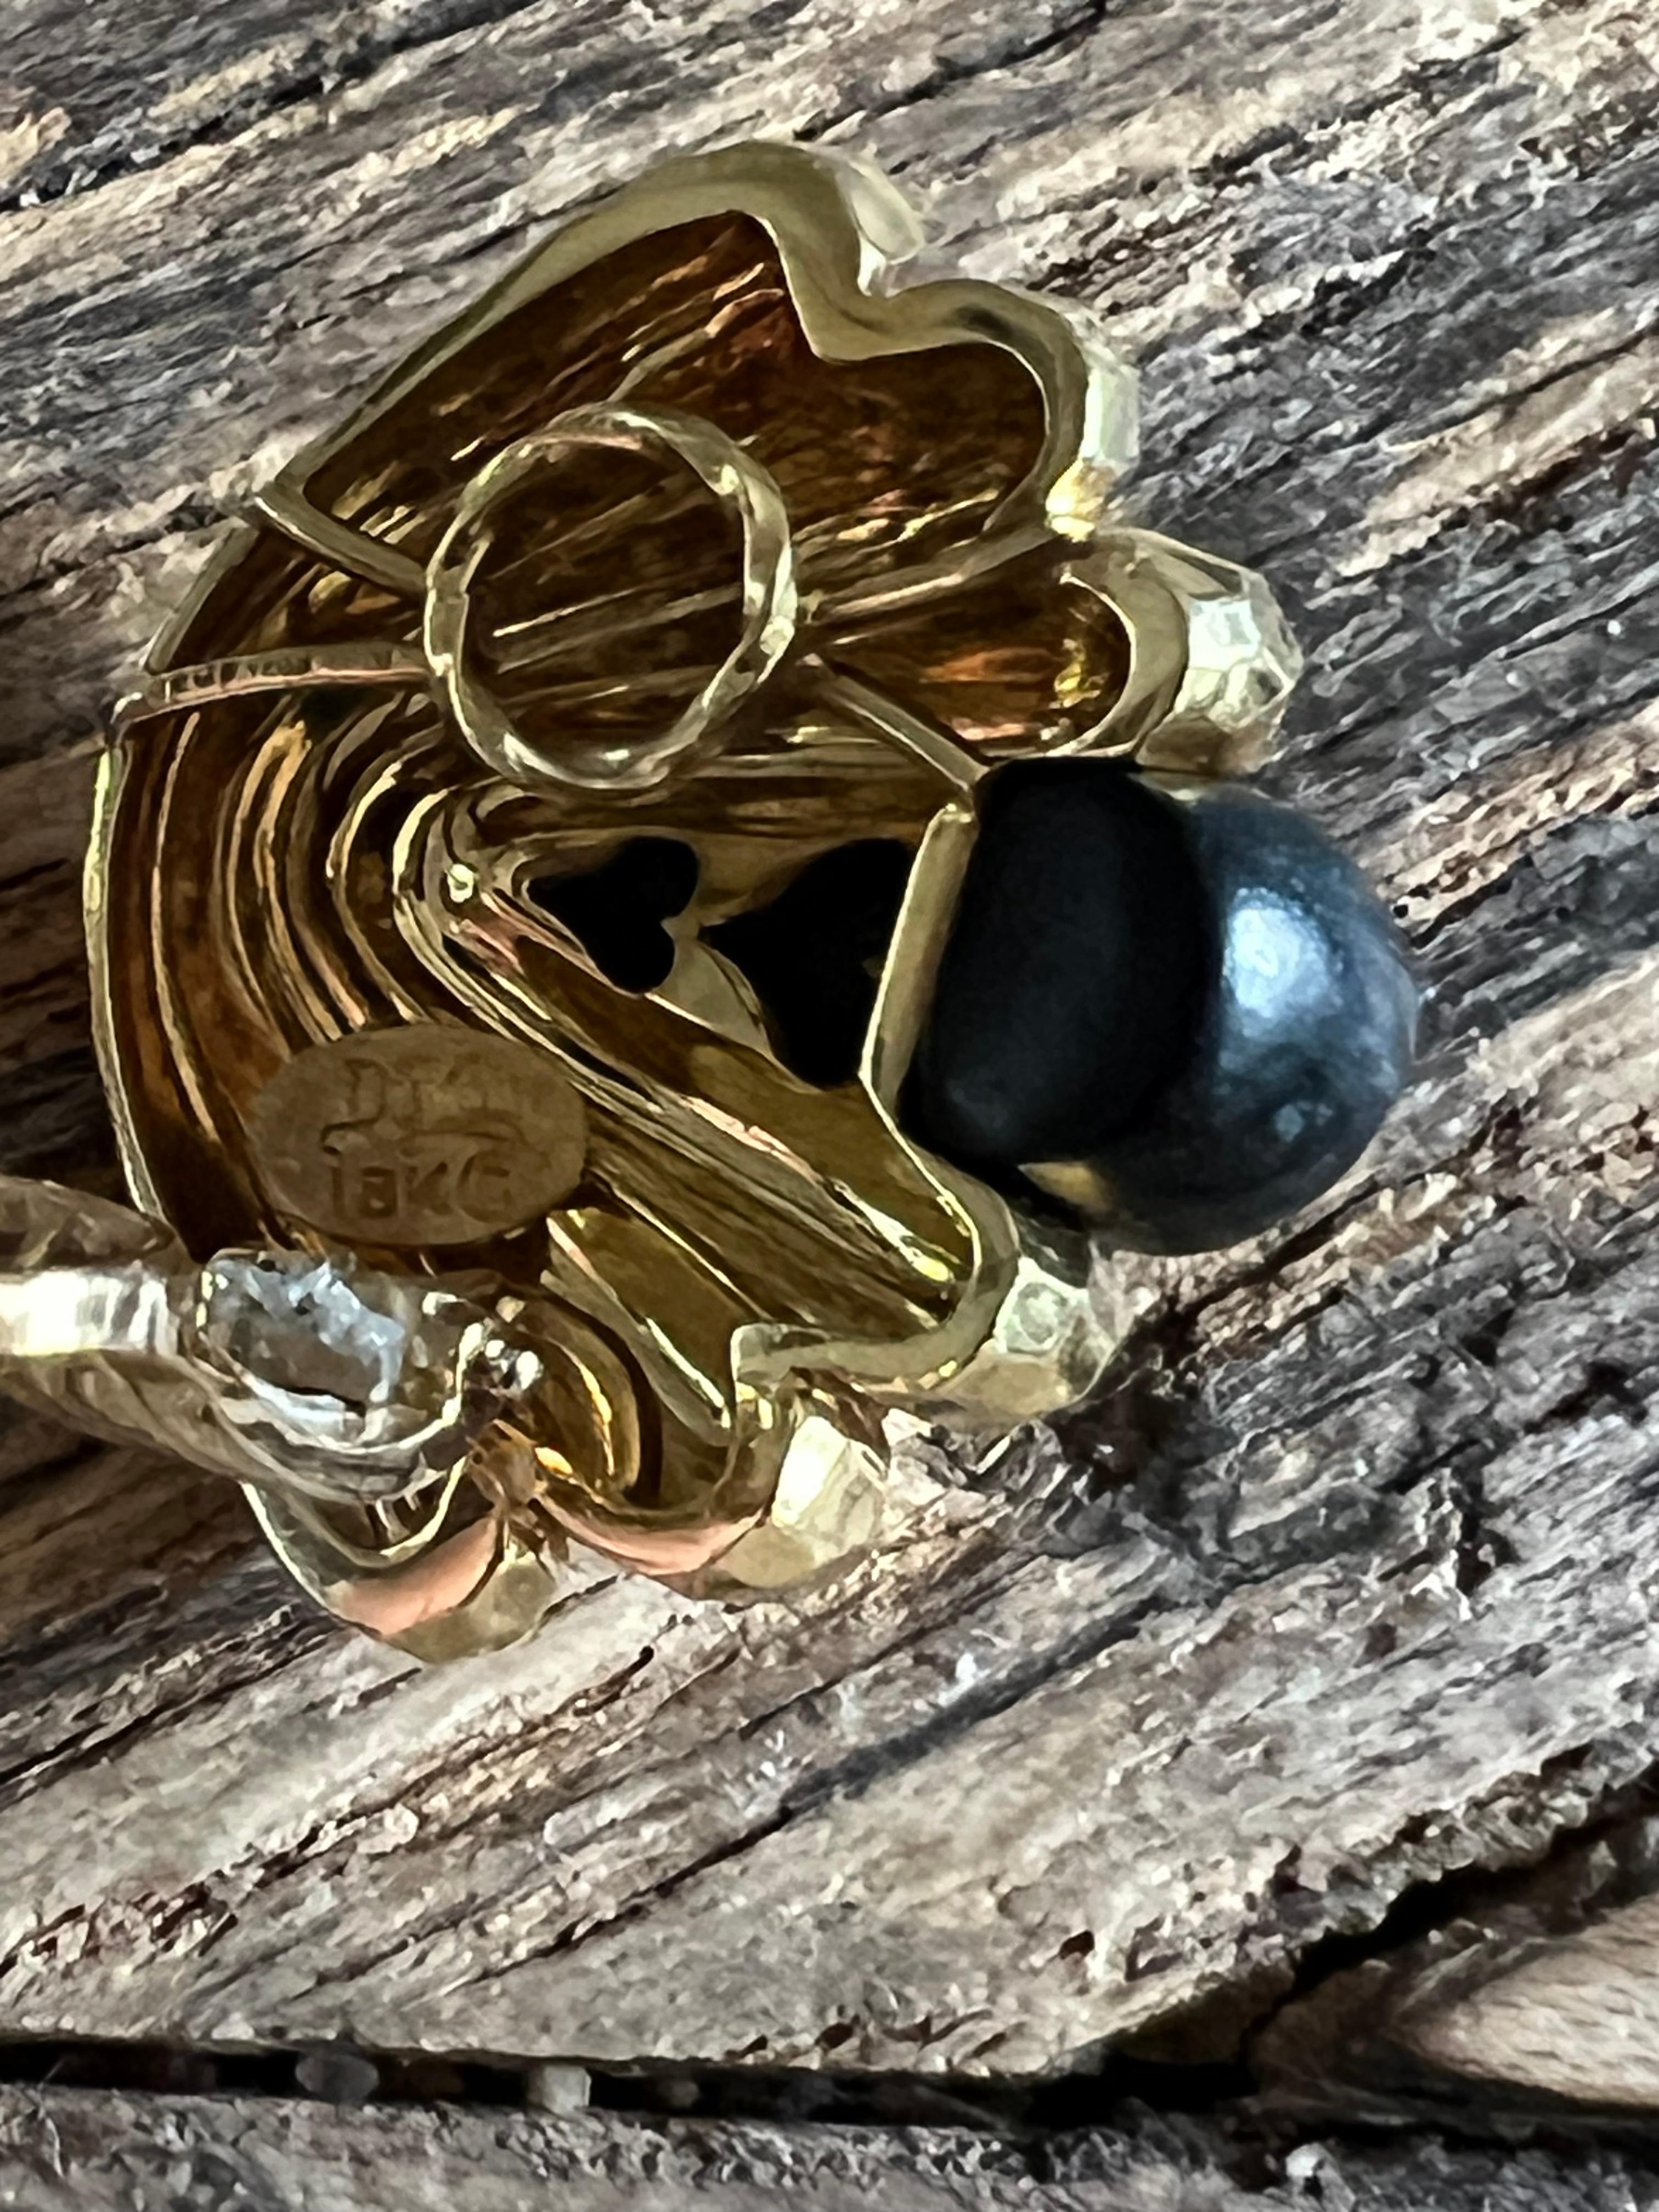 A pair of 18k yellow gold and Ebony 